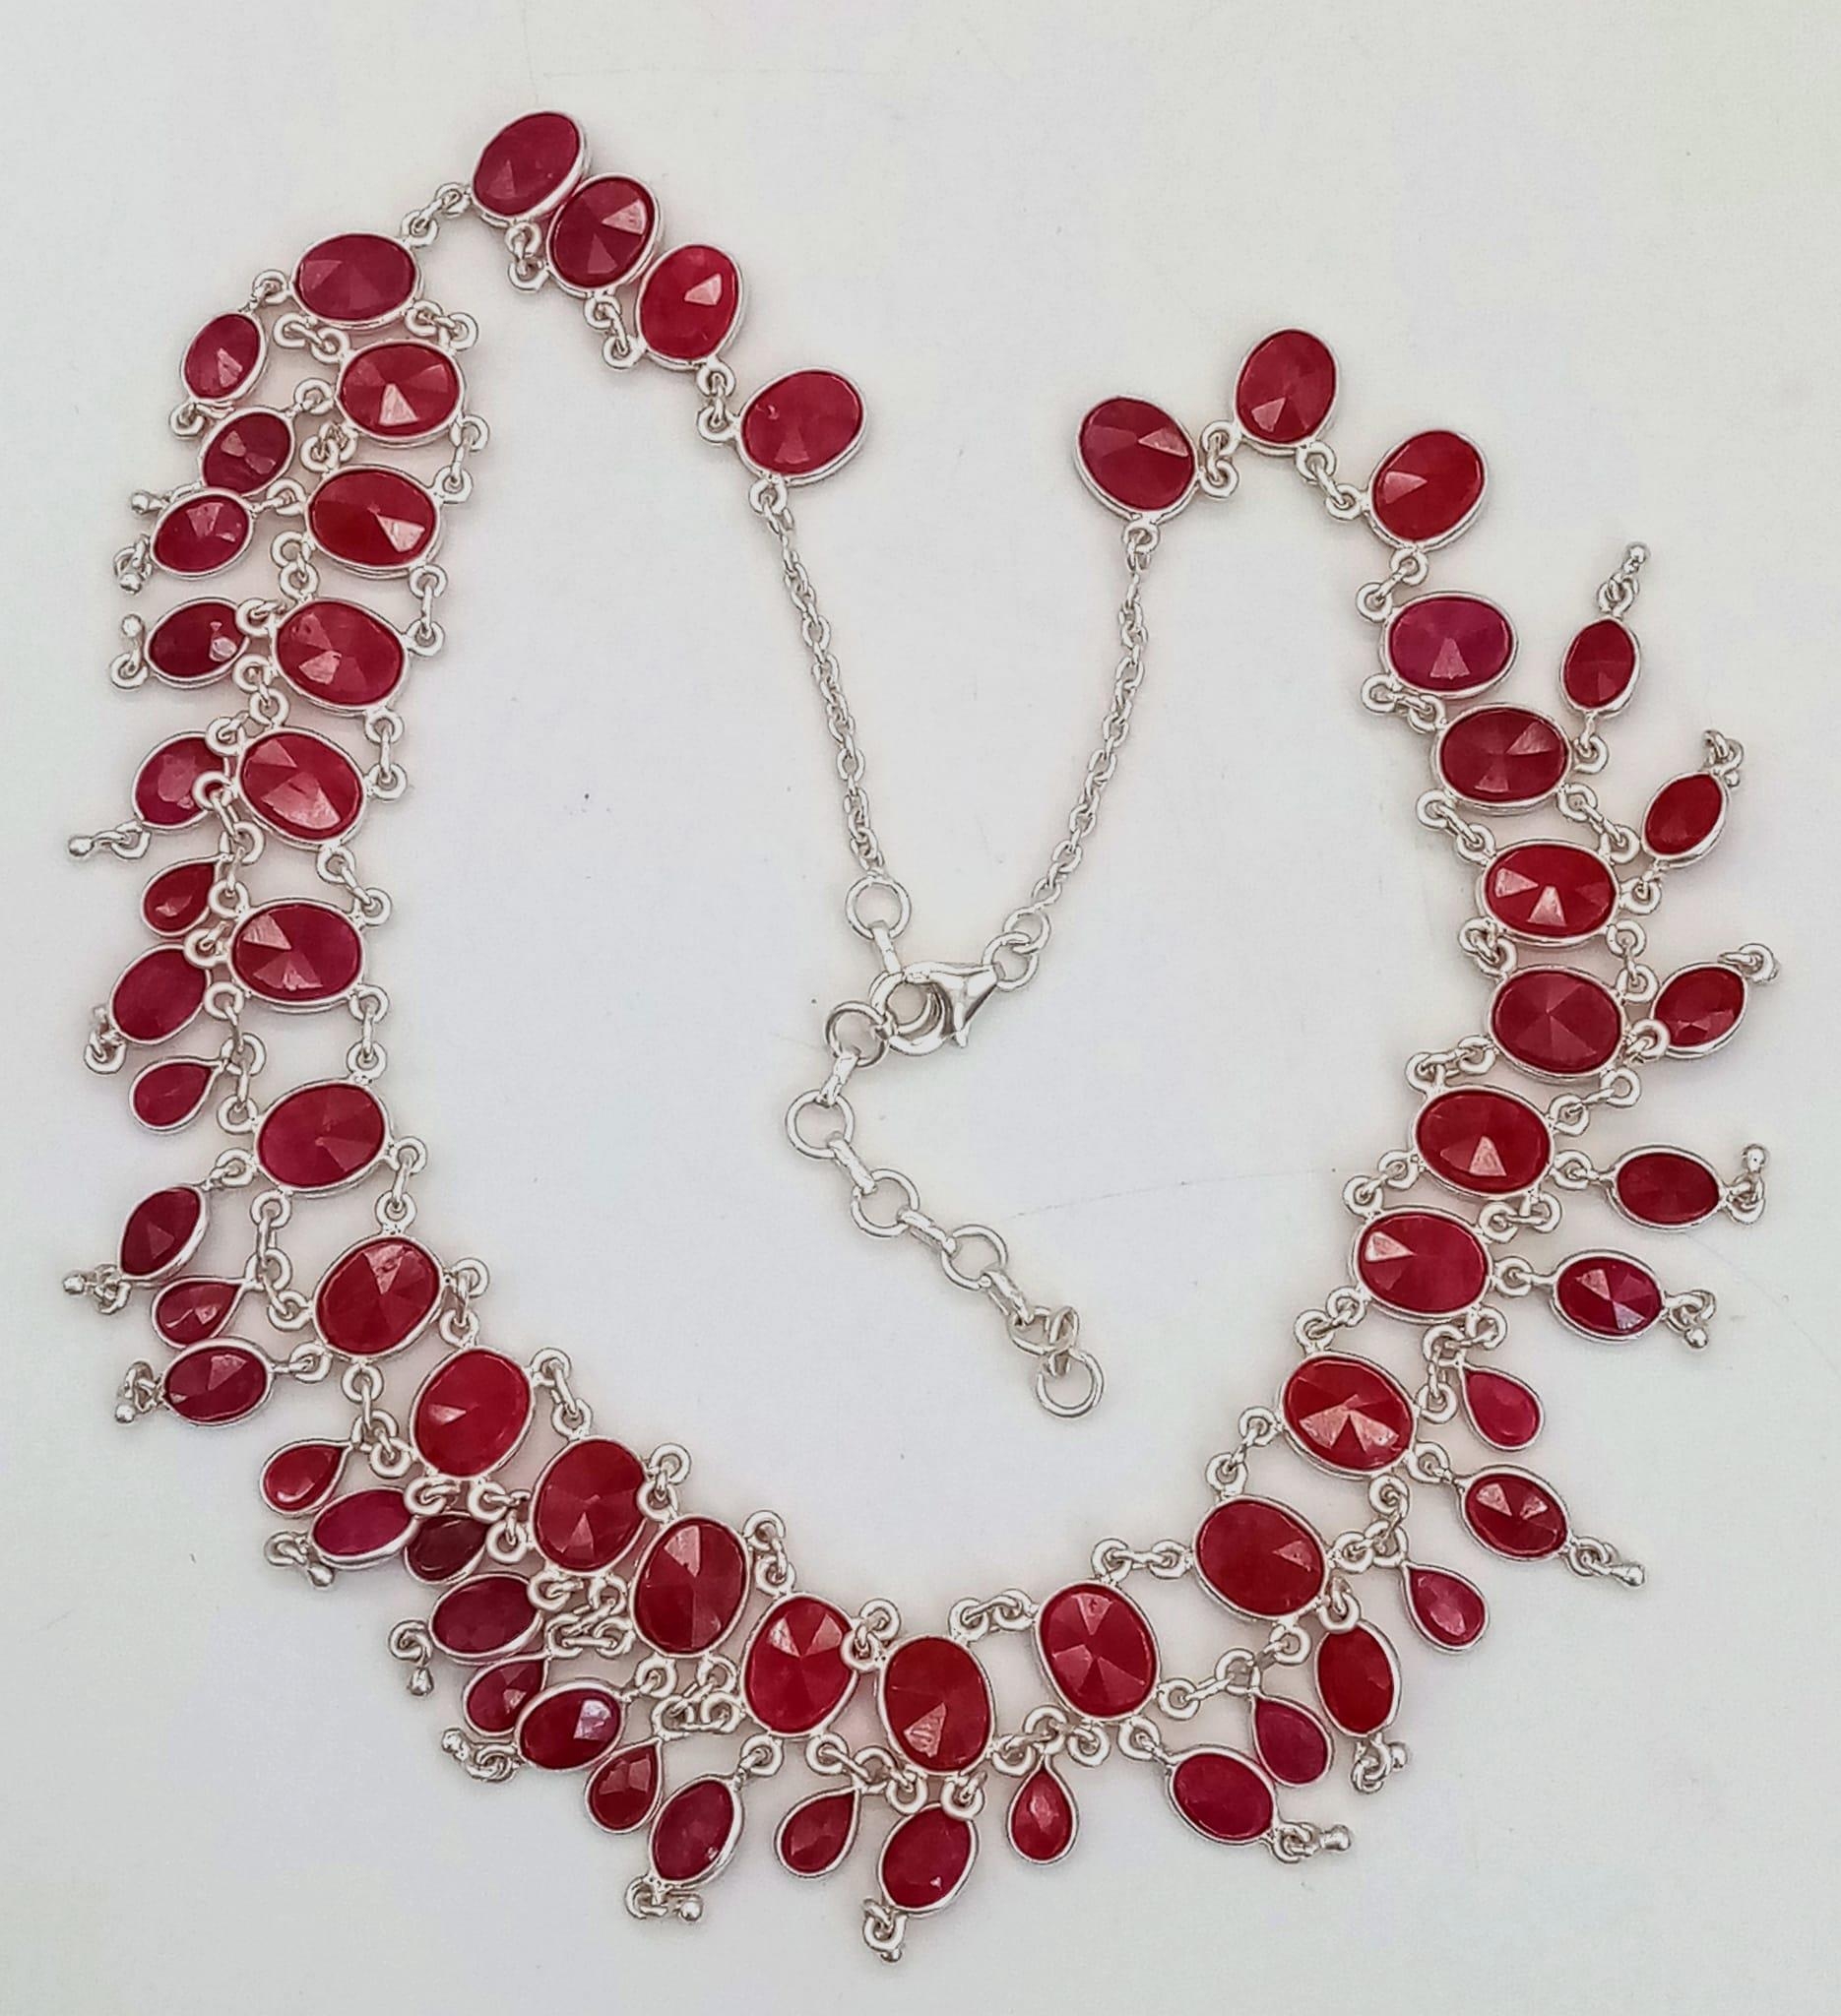 A Ruby Gemstone Choker Necklace set in 925 Silver. Two rows of oval cut rubies. 38.58g total weight. - Image 2 of 4